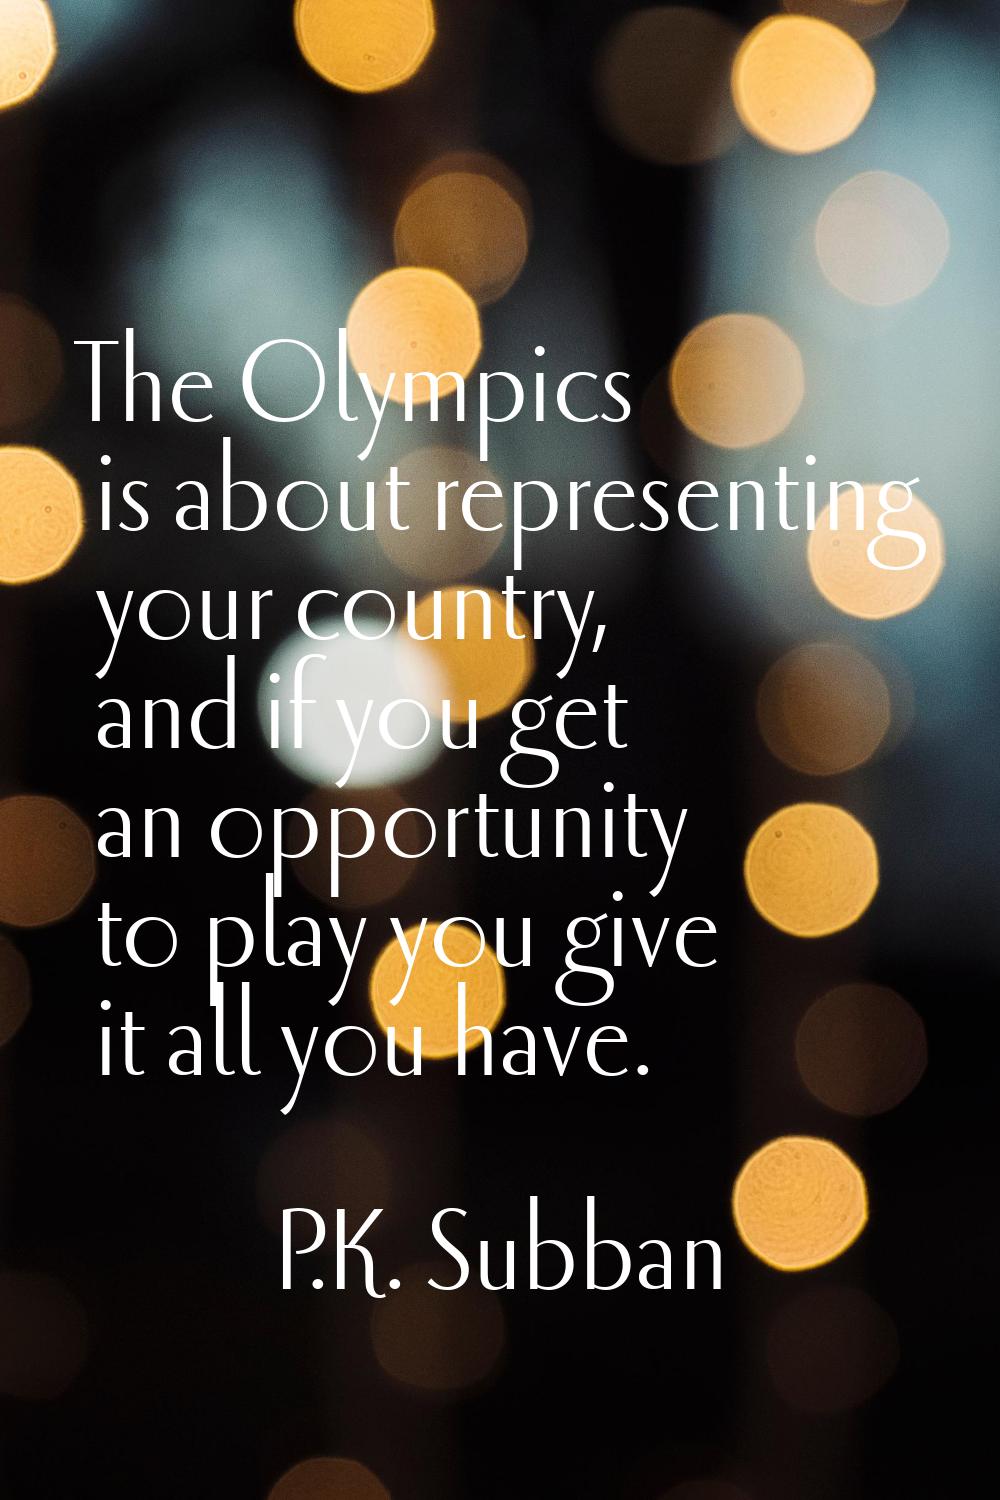 The Olympics is about representing your country, and if you get an opportunity to play you give it 